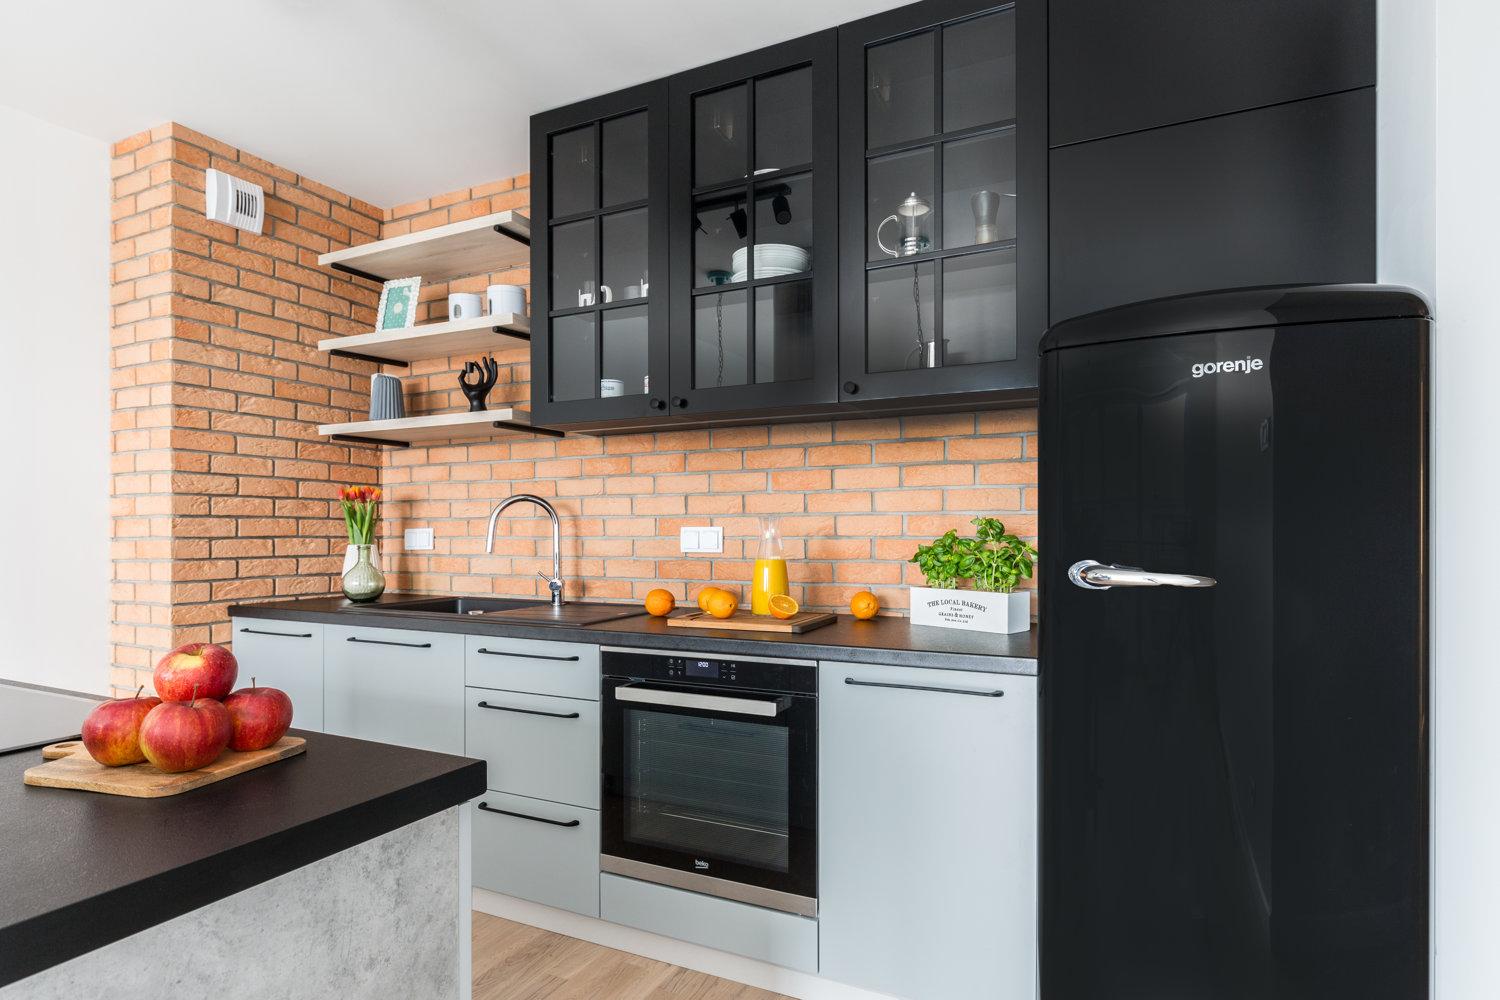 The kitchen is decorated in an industrial style